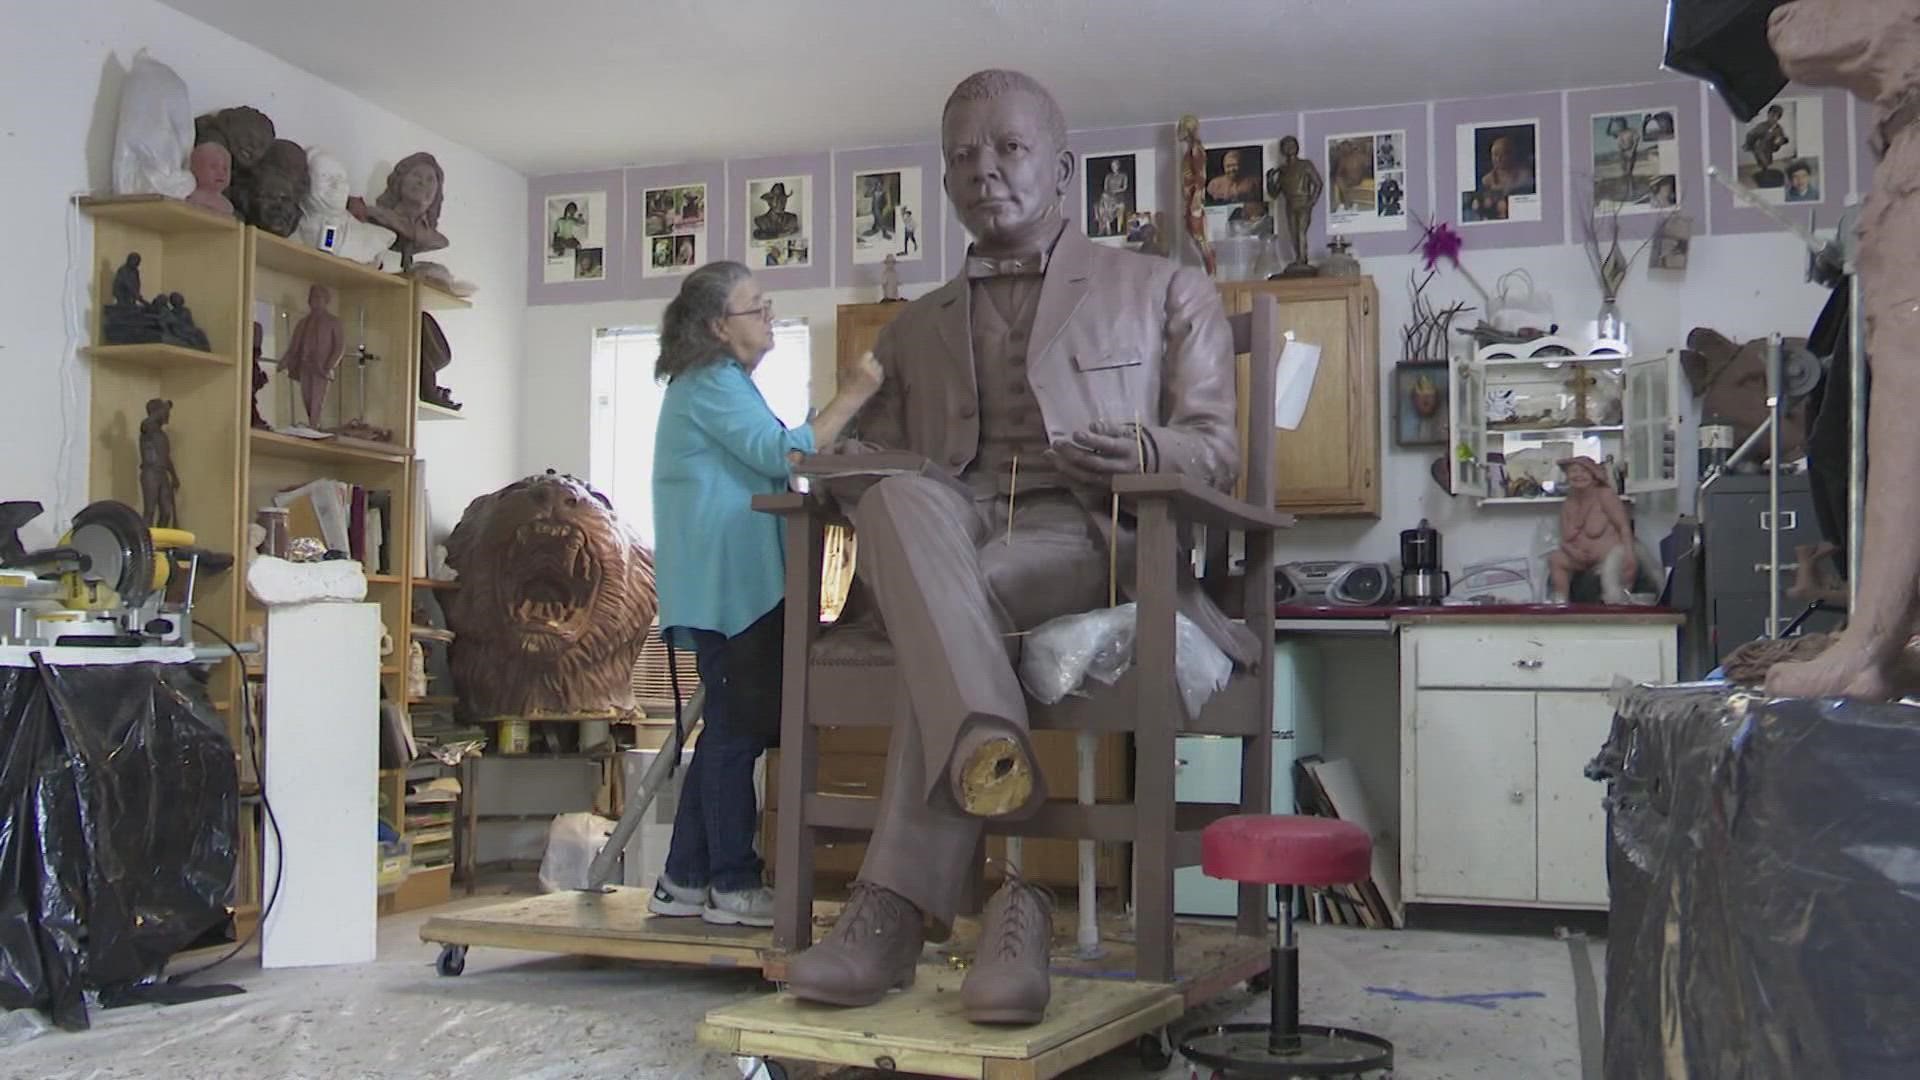 Bridgette Mongeon created a sculpture of Booker T. Washington for an HISD high school that bears his name. She hopes the statute teaches students about his life.